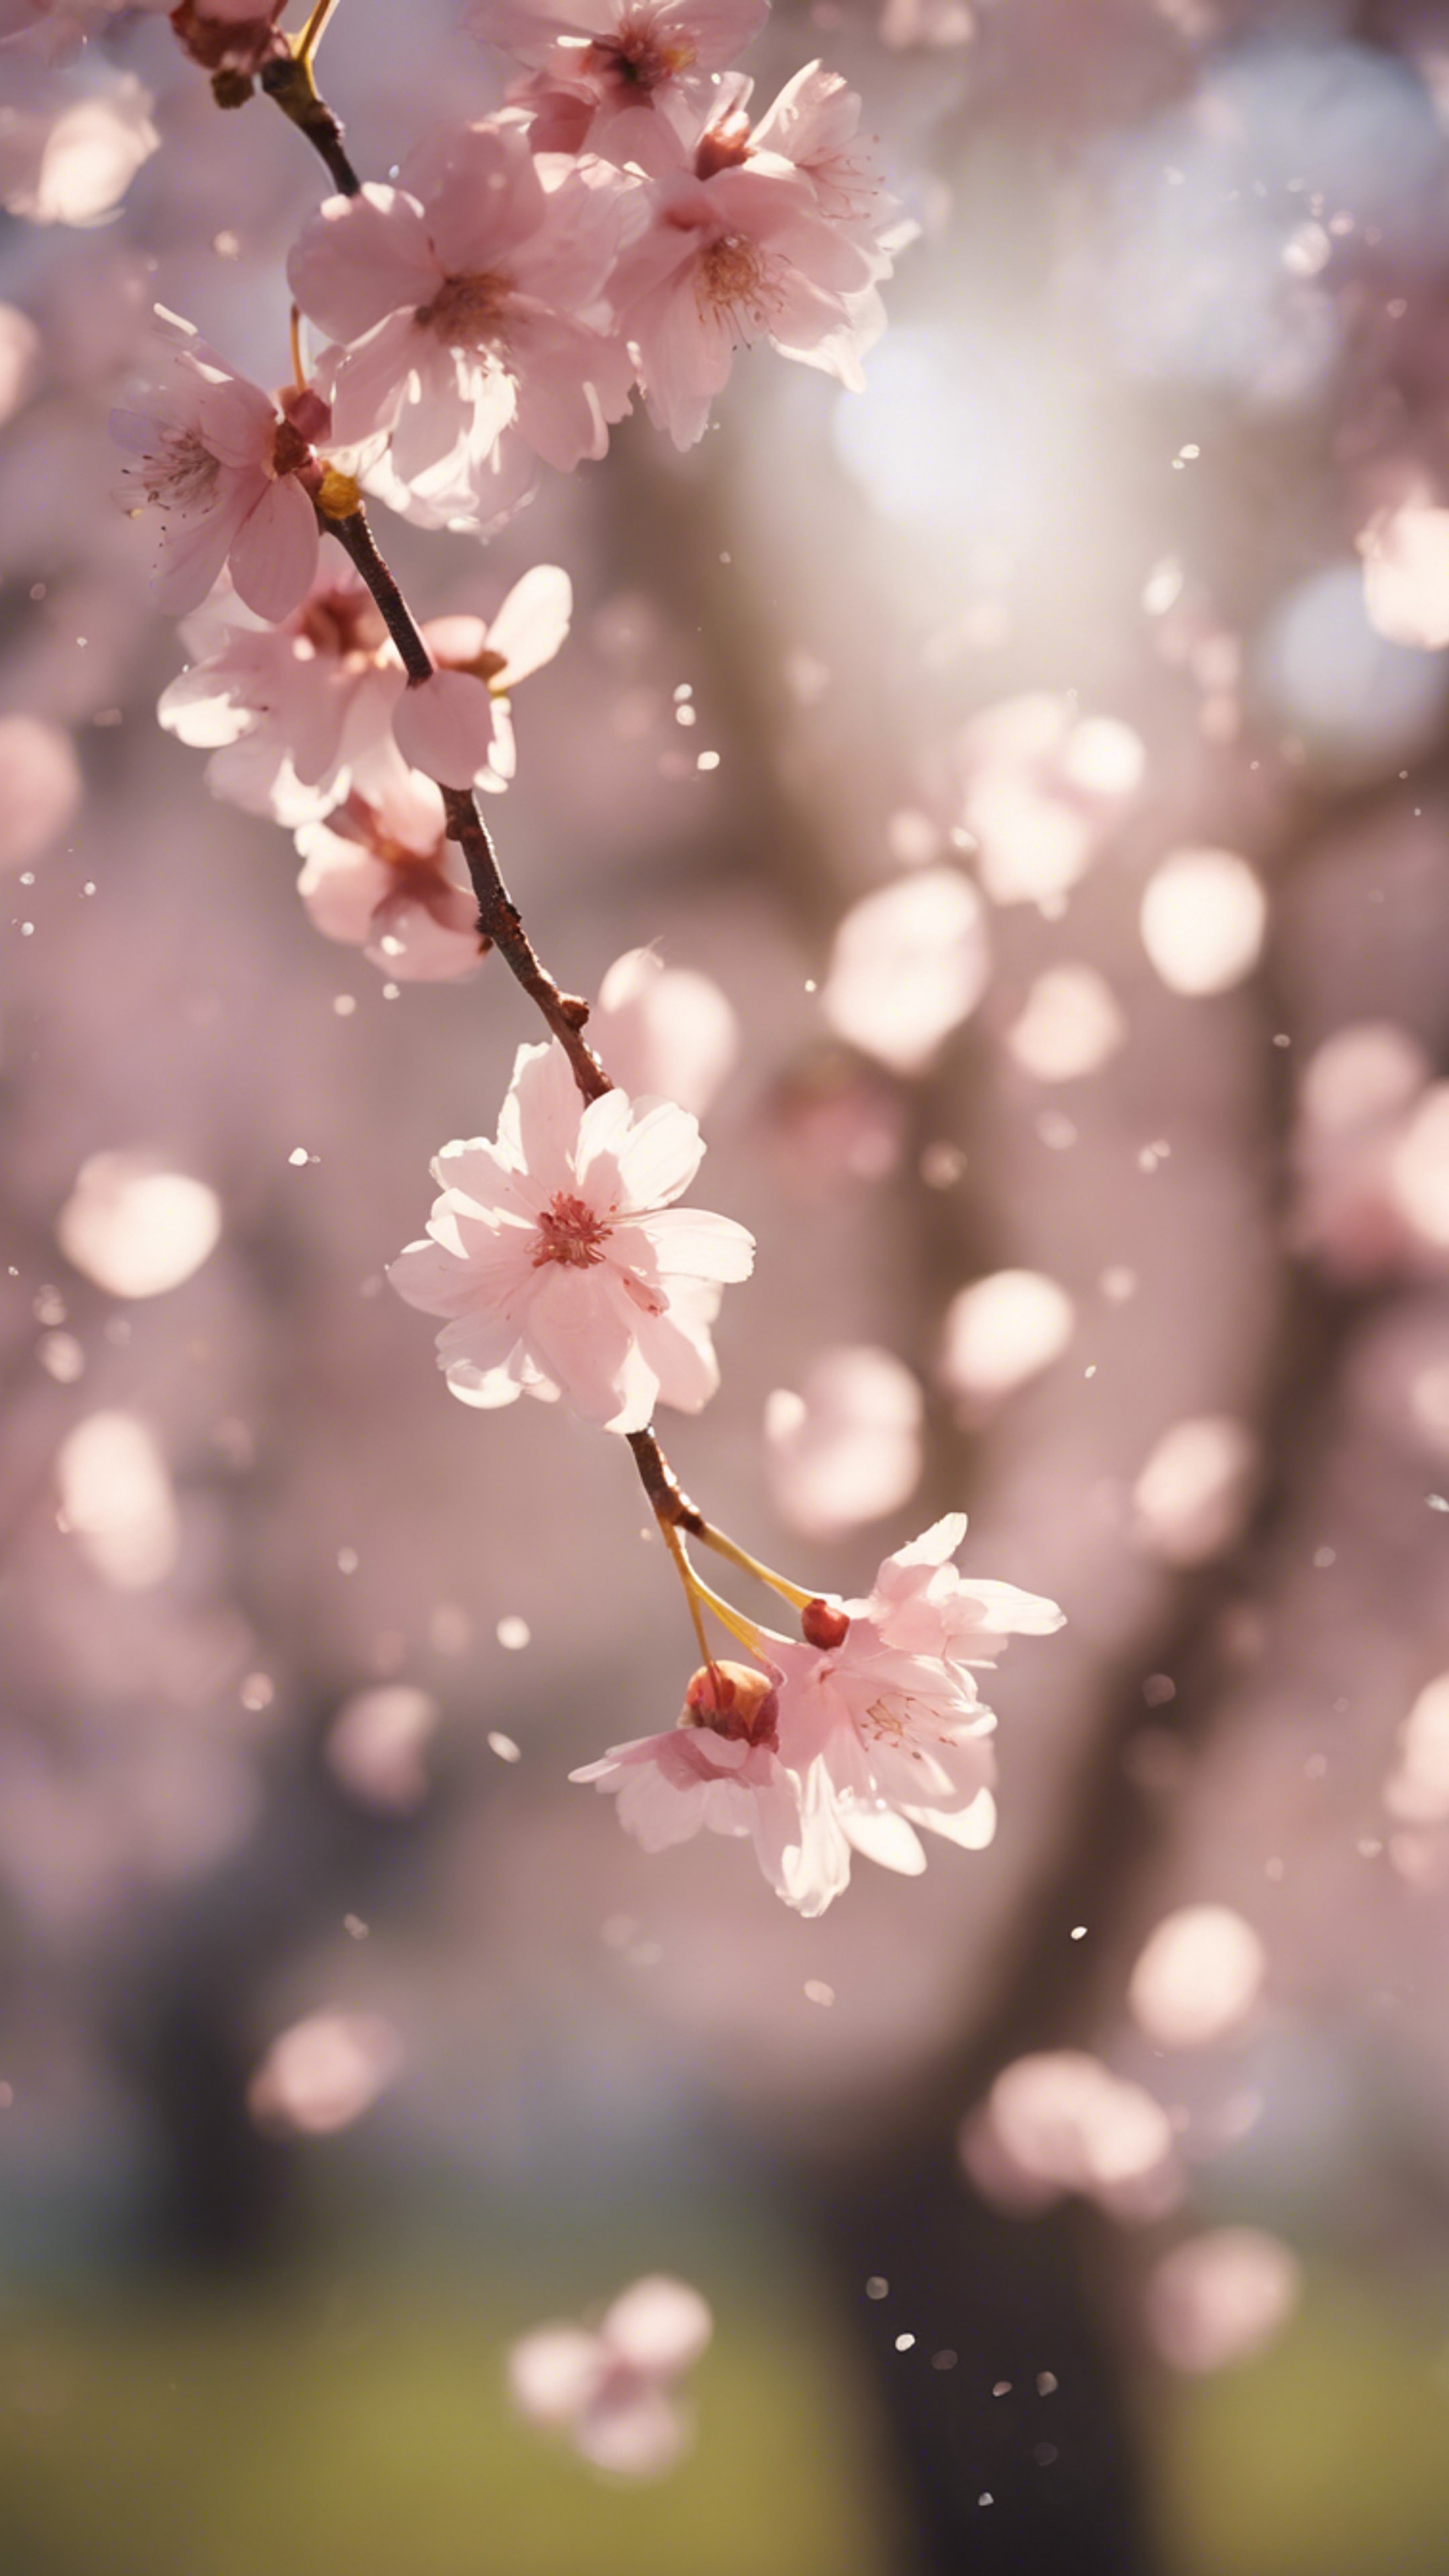 Tiny, light pink cherry blossom petals falling gently from a tree in the morning light. Wallpaper[bcff163445454d48bfbe]